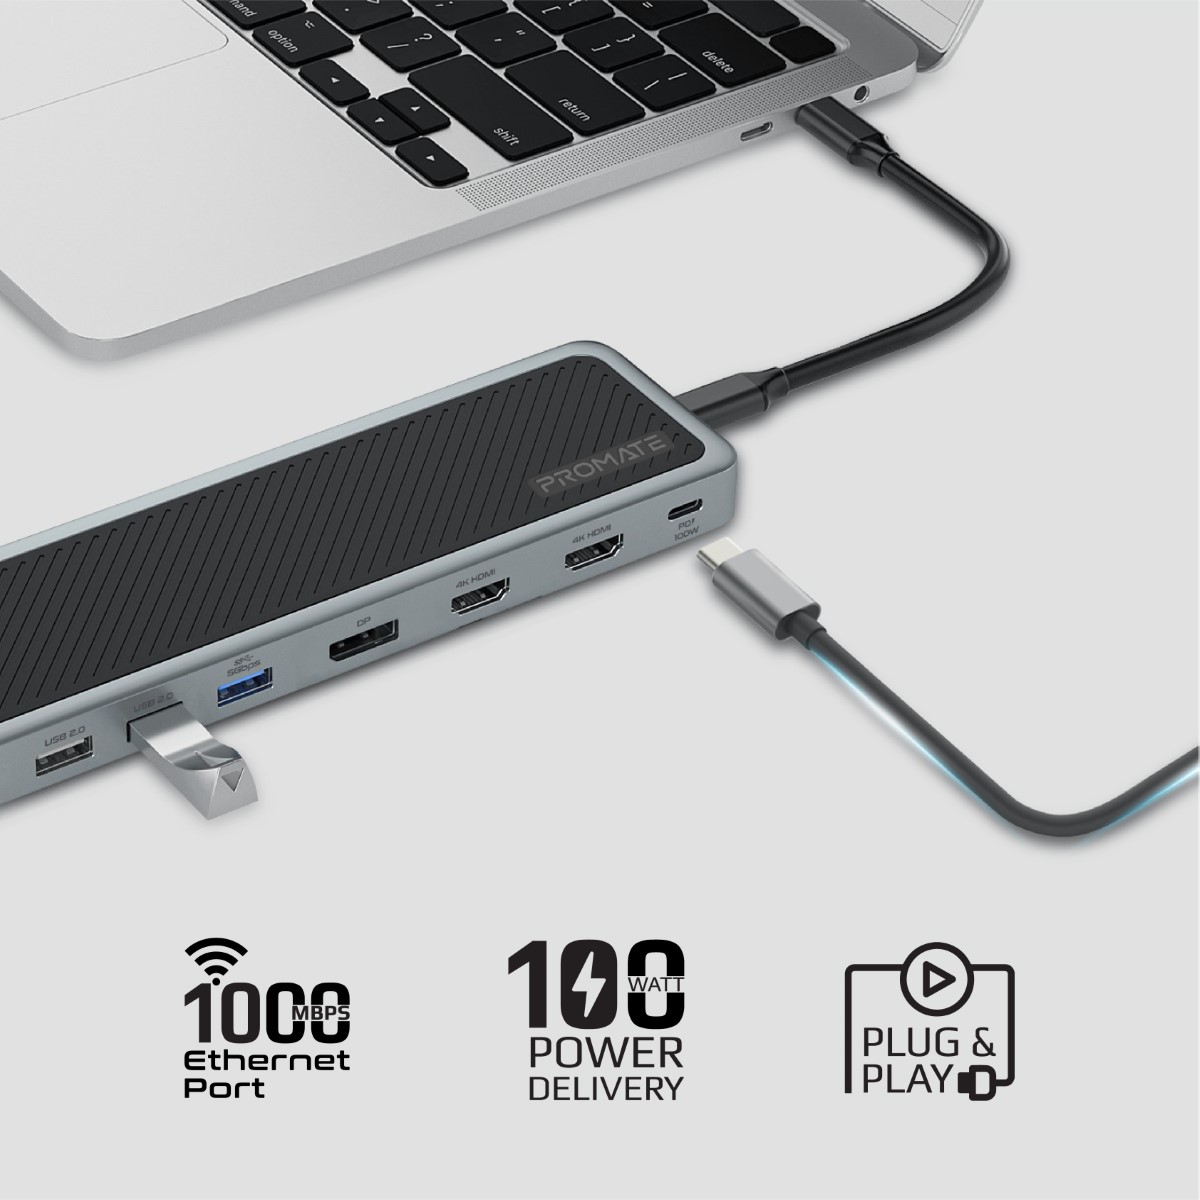 Promate USB-C™ Hub, 13-in-1 Multi-Display Hub with Dual 4K HDMI, 4K DisplayPort, 1000Mbps LAN, 100W USB-C™ Power Delivery, AUX, SD/TF Card Slot, USB 3.0 and USB 2.0 Ports for MacBook Pro, Dell, ApexHub-MST